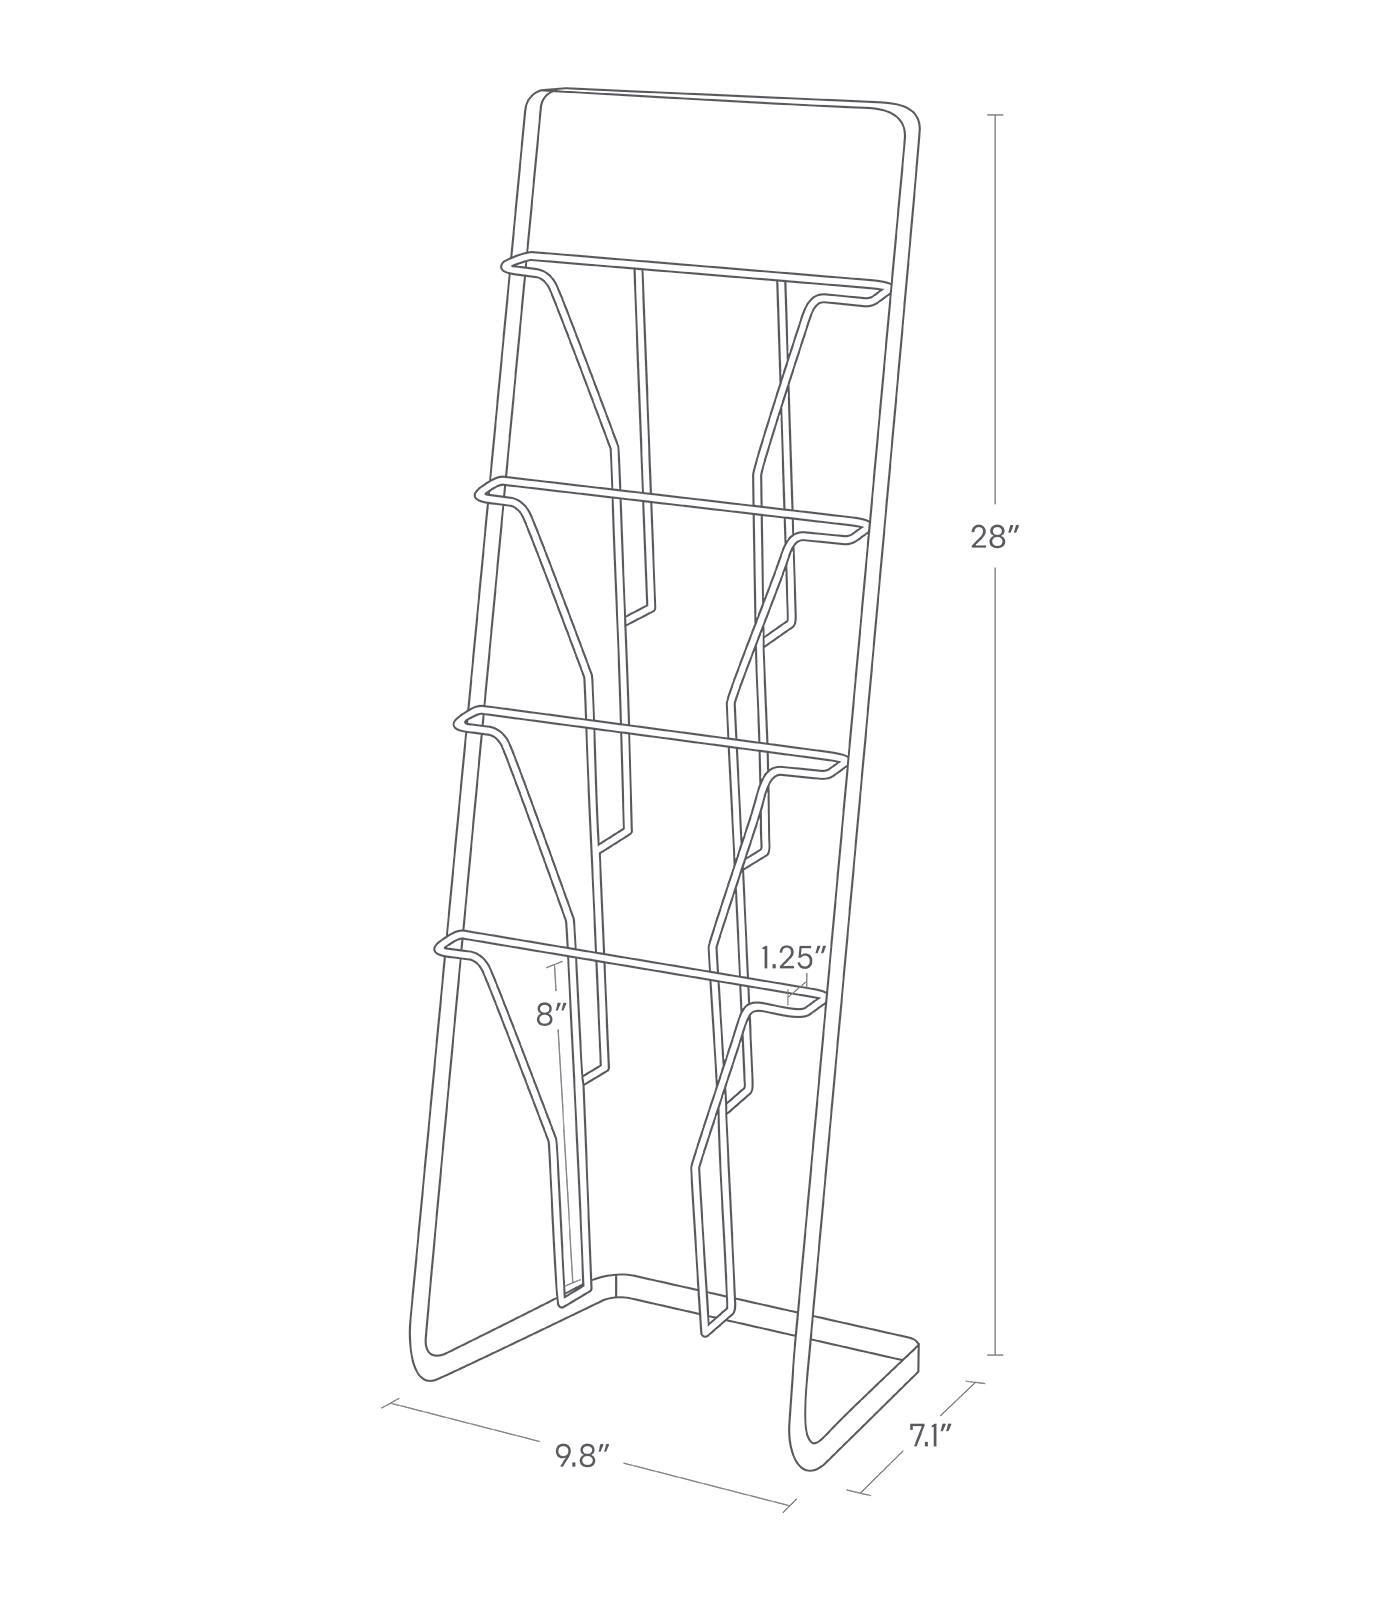 Dimension Image for Magazine Rack on a white background showing width of 9.8